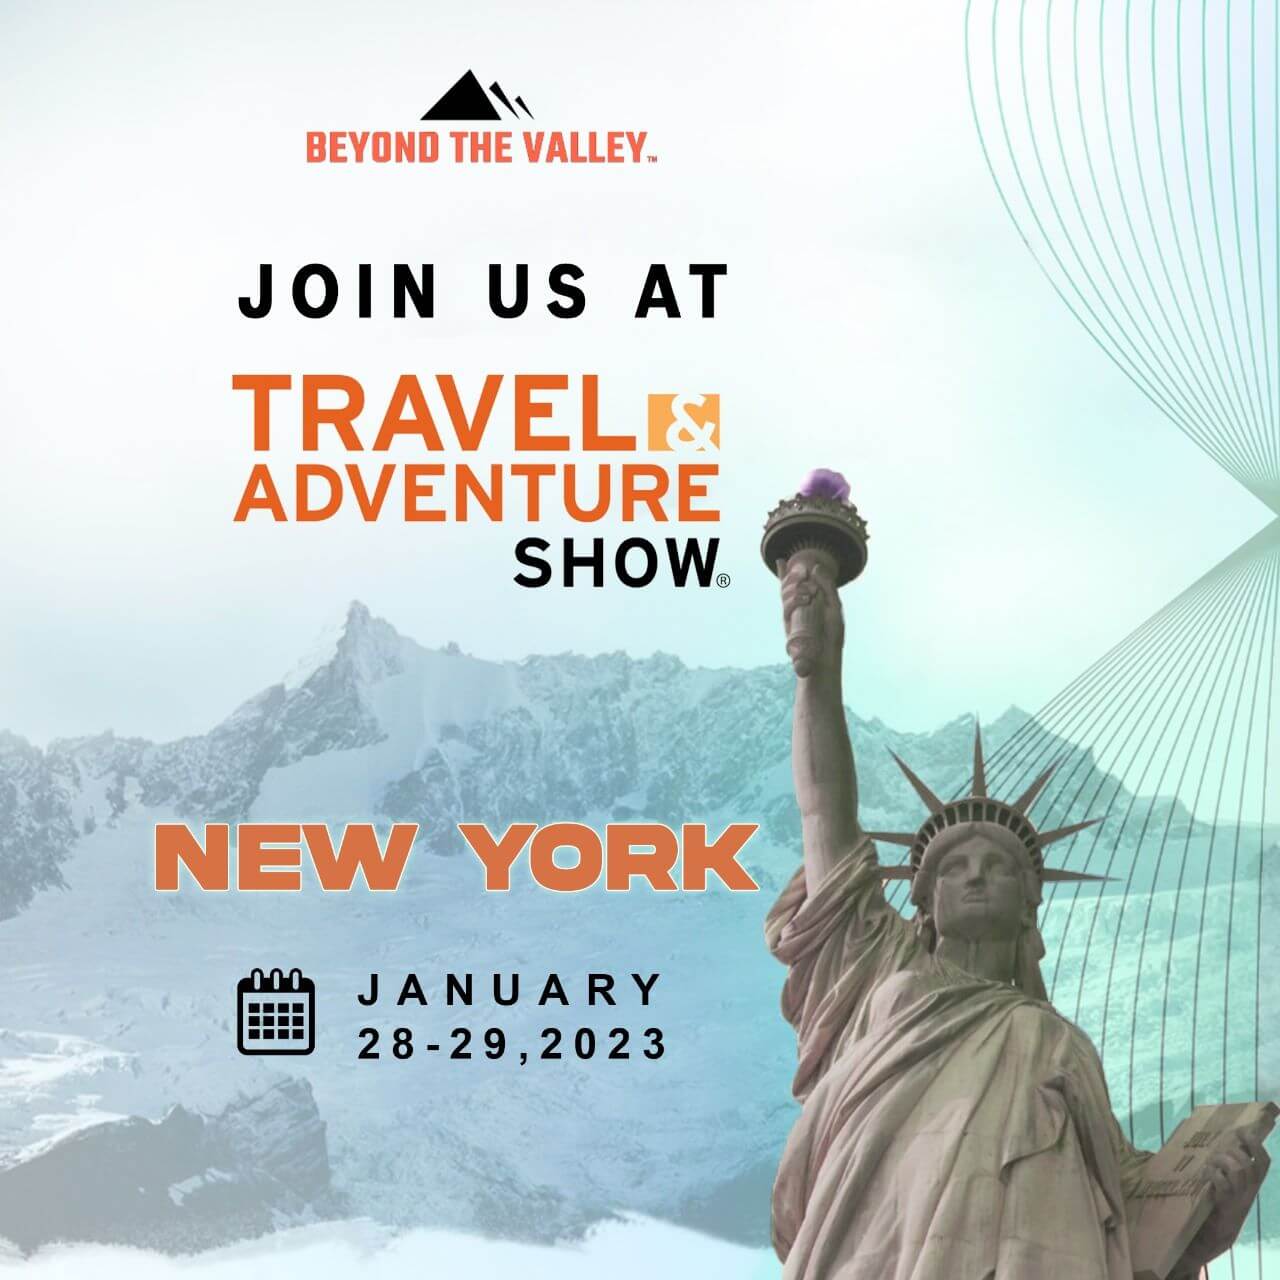 Travel & Adventure Show 2023 At New York Beyond The Valley